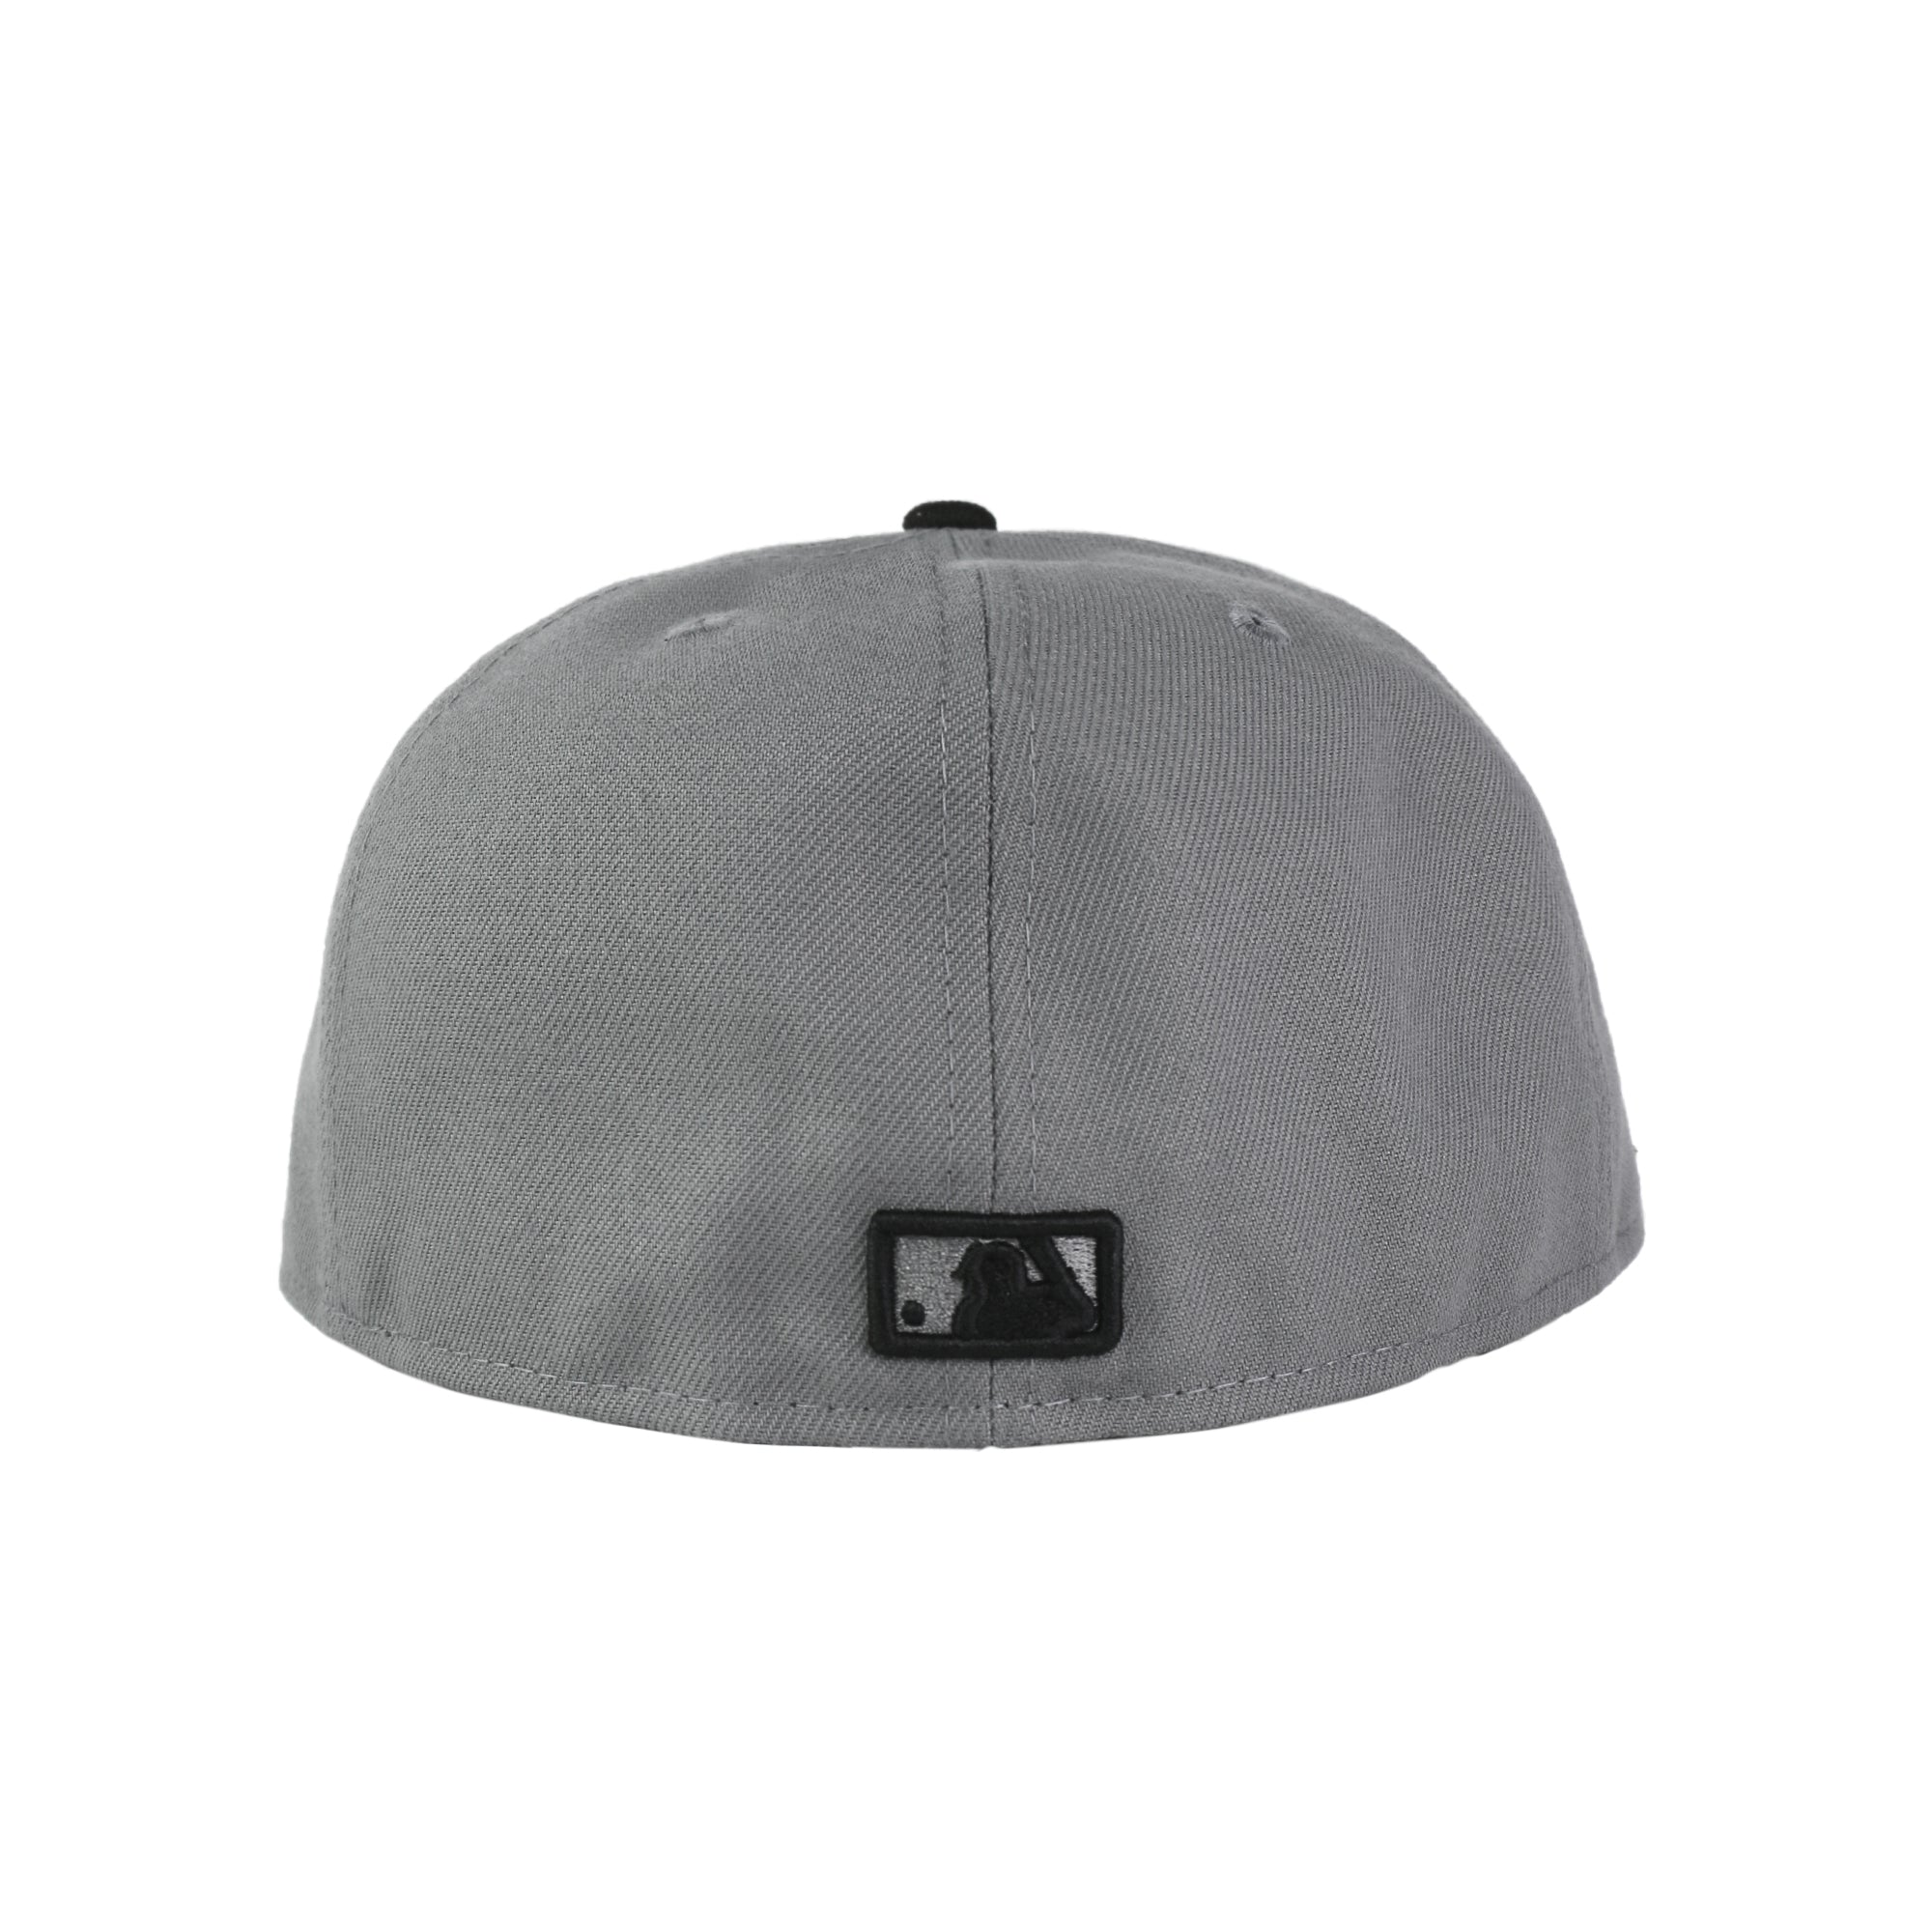 New Era All Black/Gray Bottom MLB All Over Logos 59FIFTY Fitted